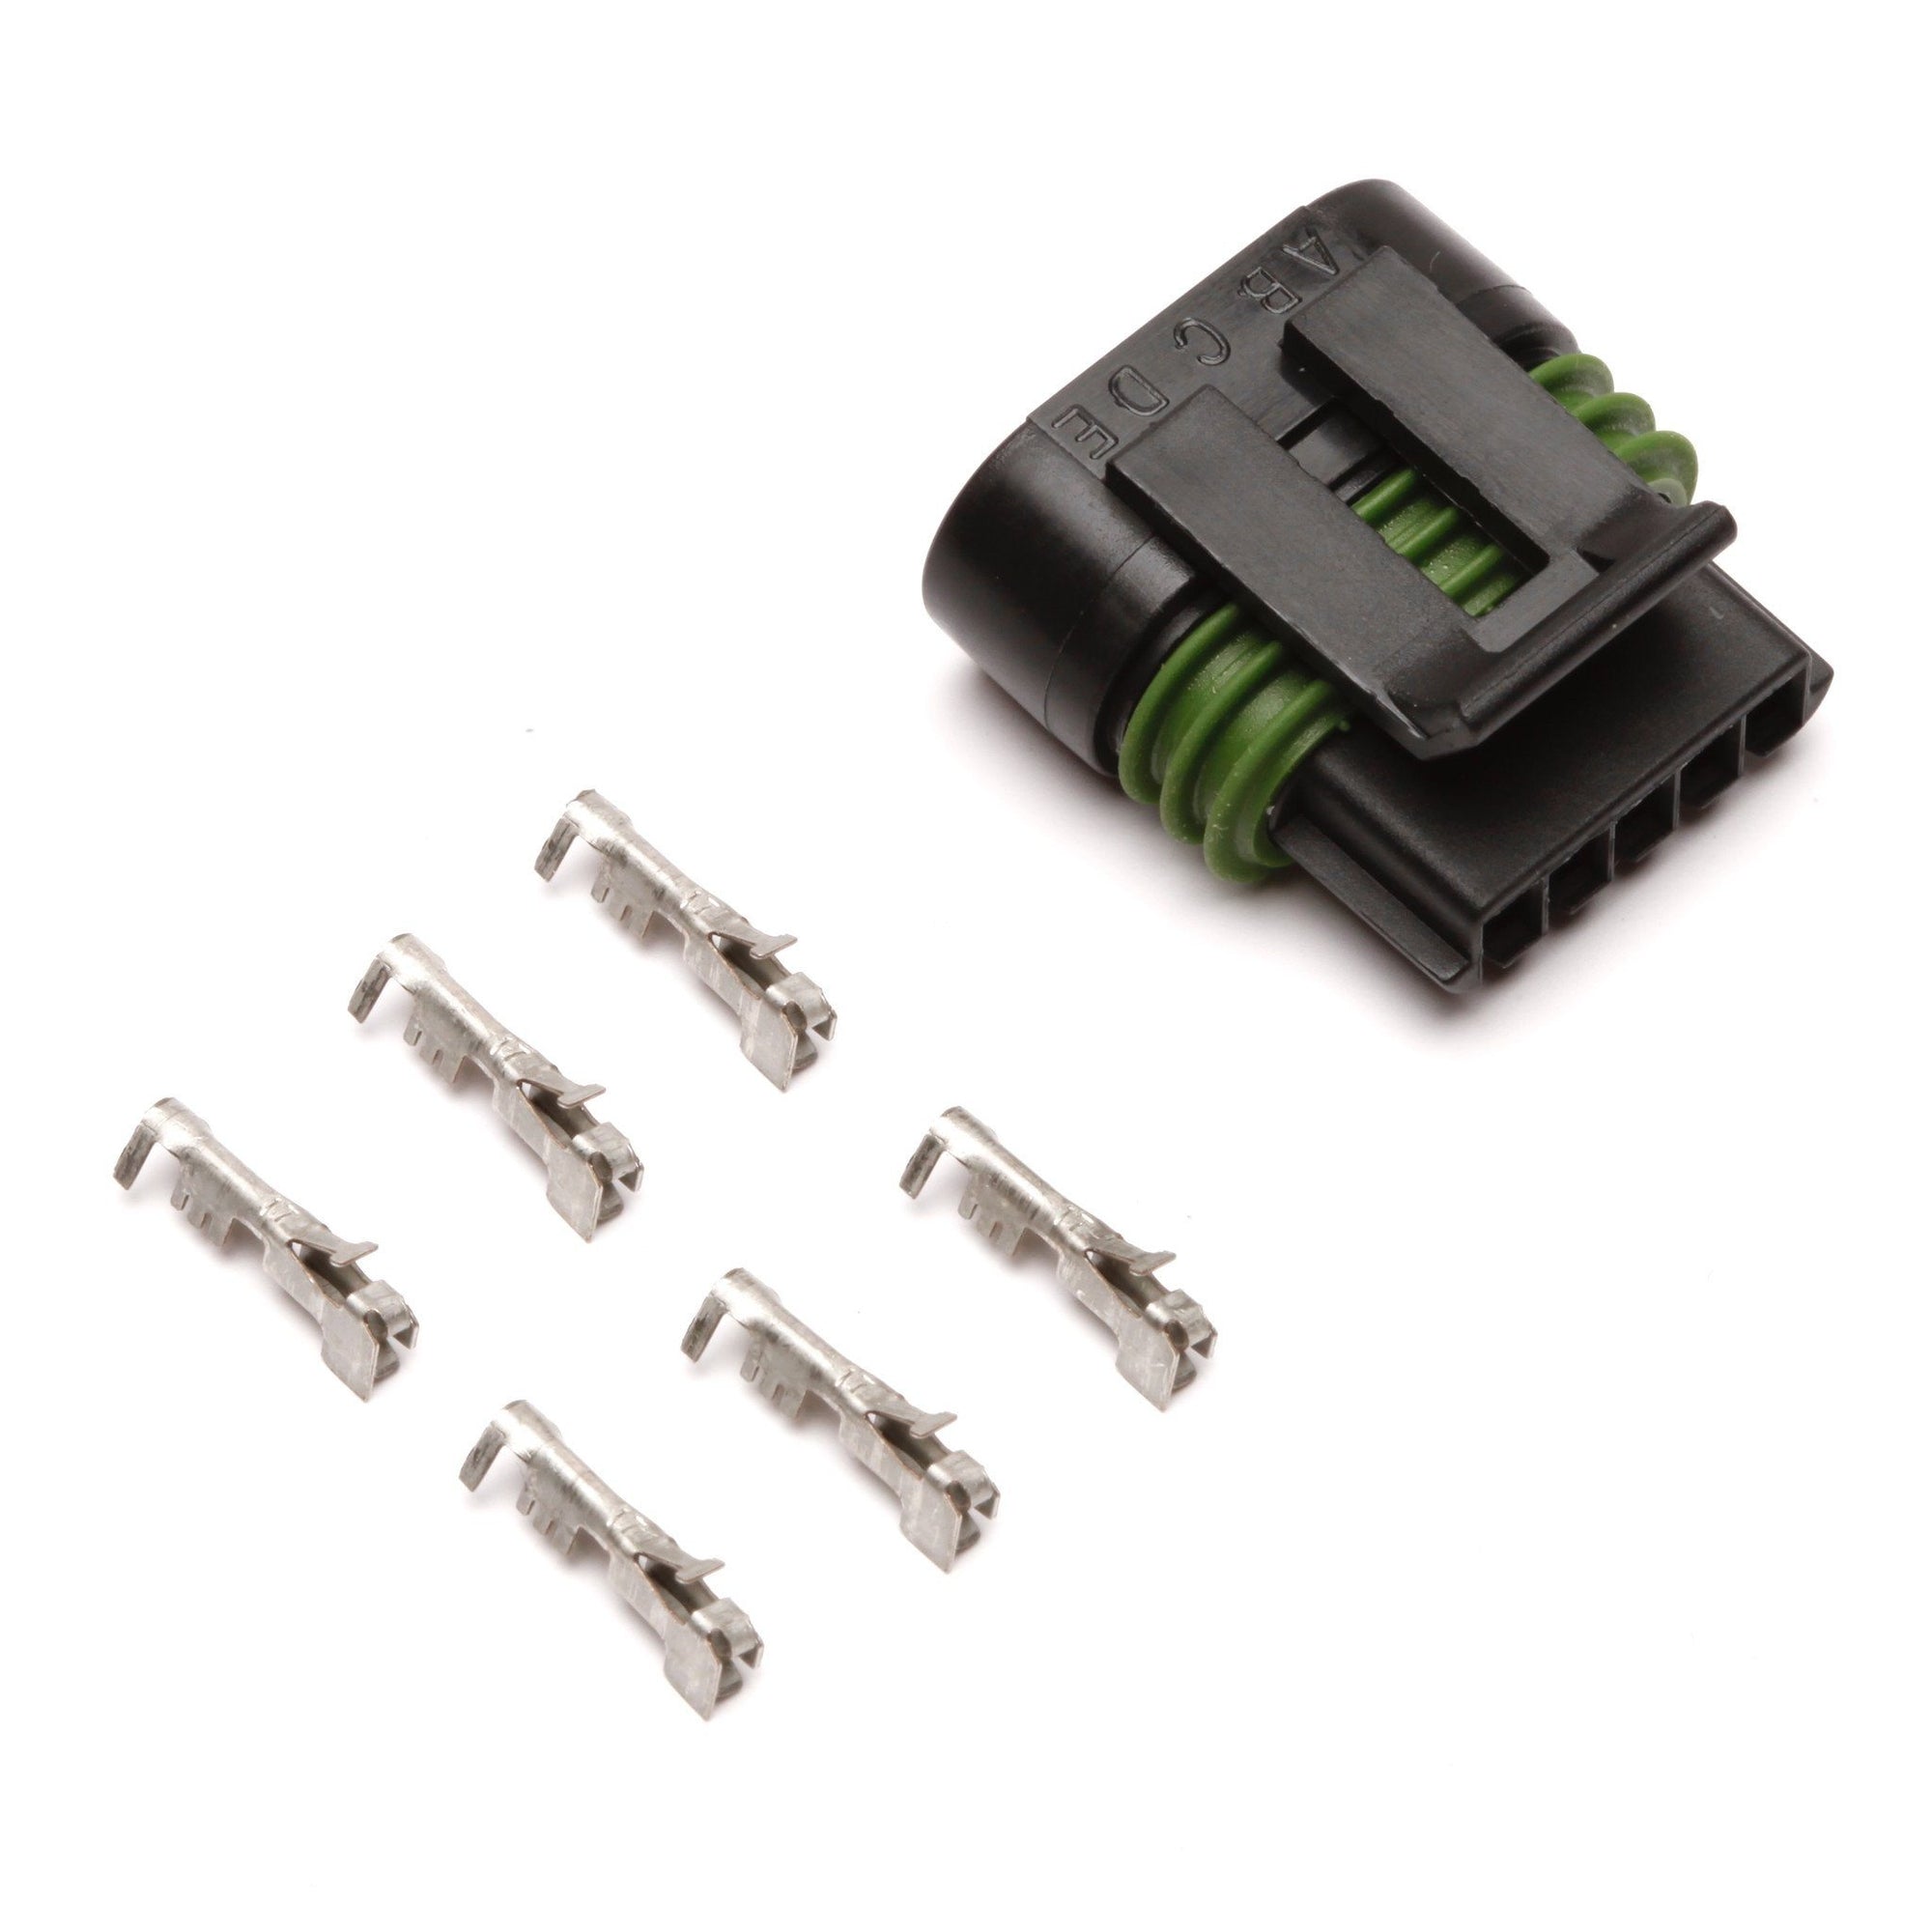 Connectors - IGN1A Coil Connector Kit